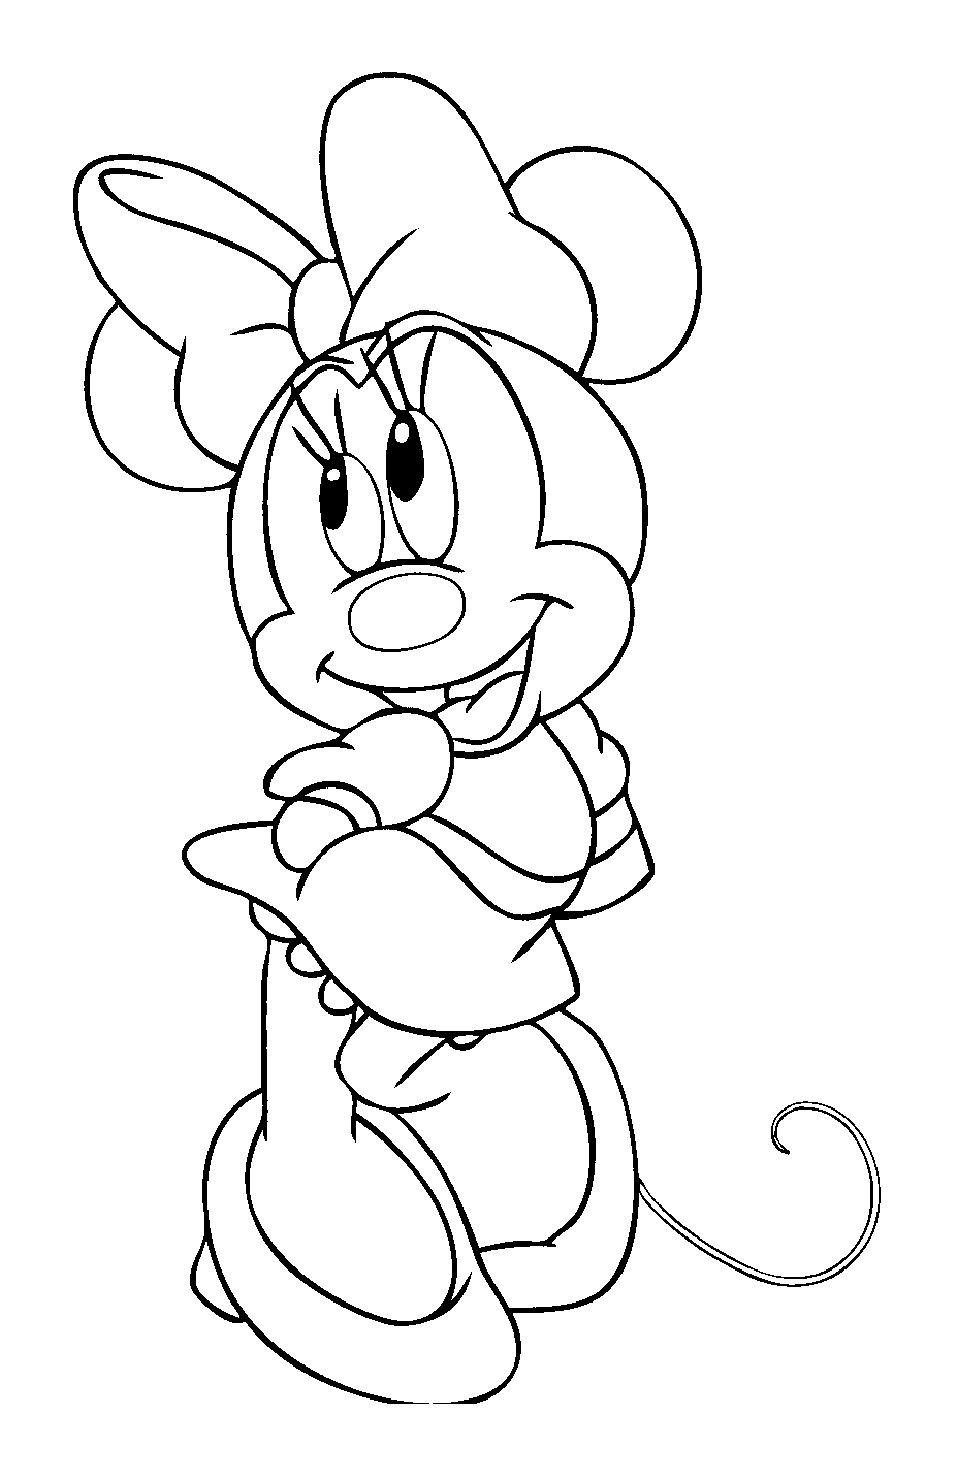 14 Magnificient Coloriage Mickey Et Minnie Stock | Coloriage Walt concernant Mickey Et Minnie À Colorier